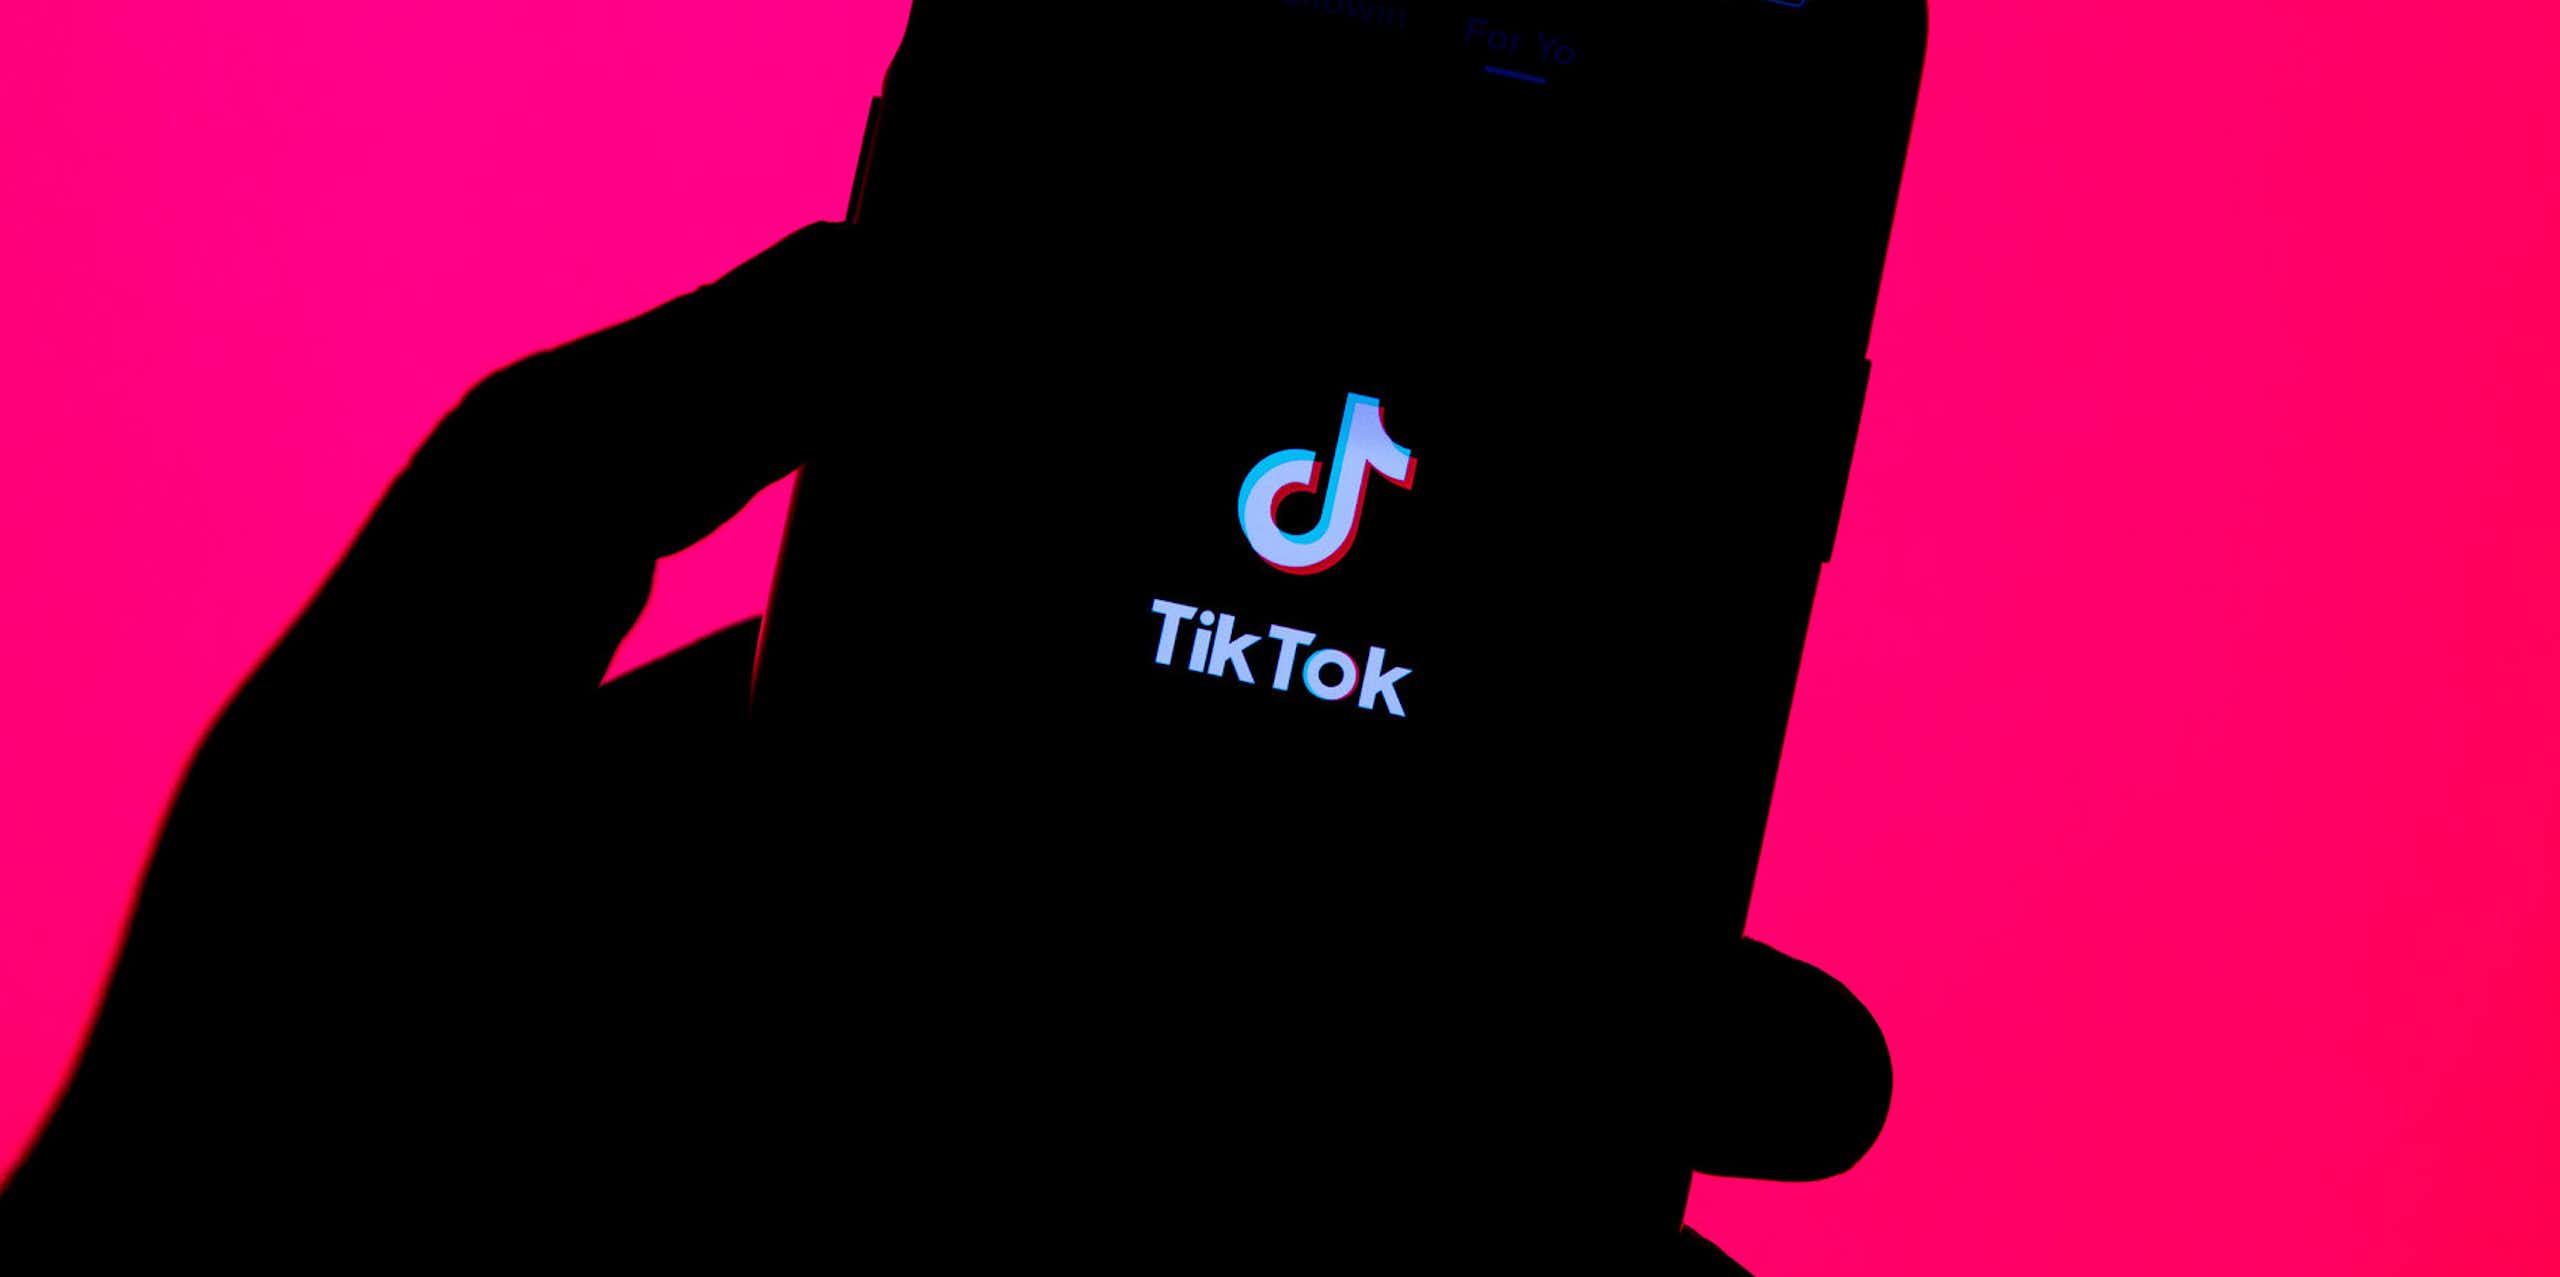 silhouette of a hand holding a smartphone with an app splash screen visible on the phone